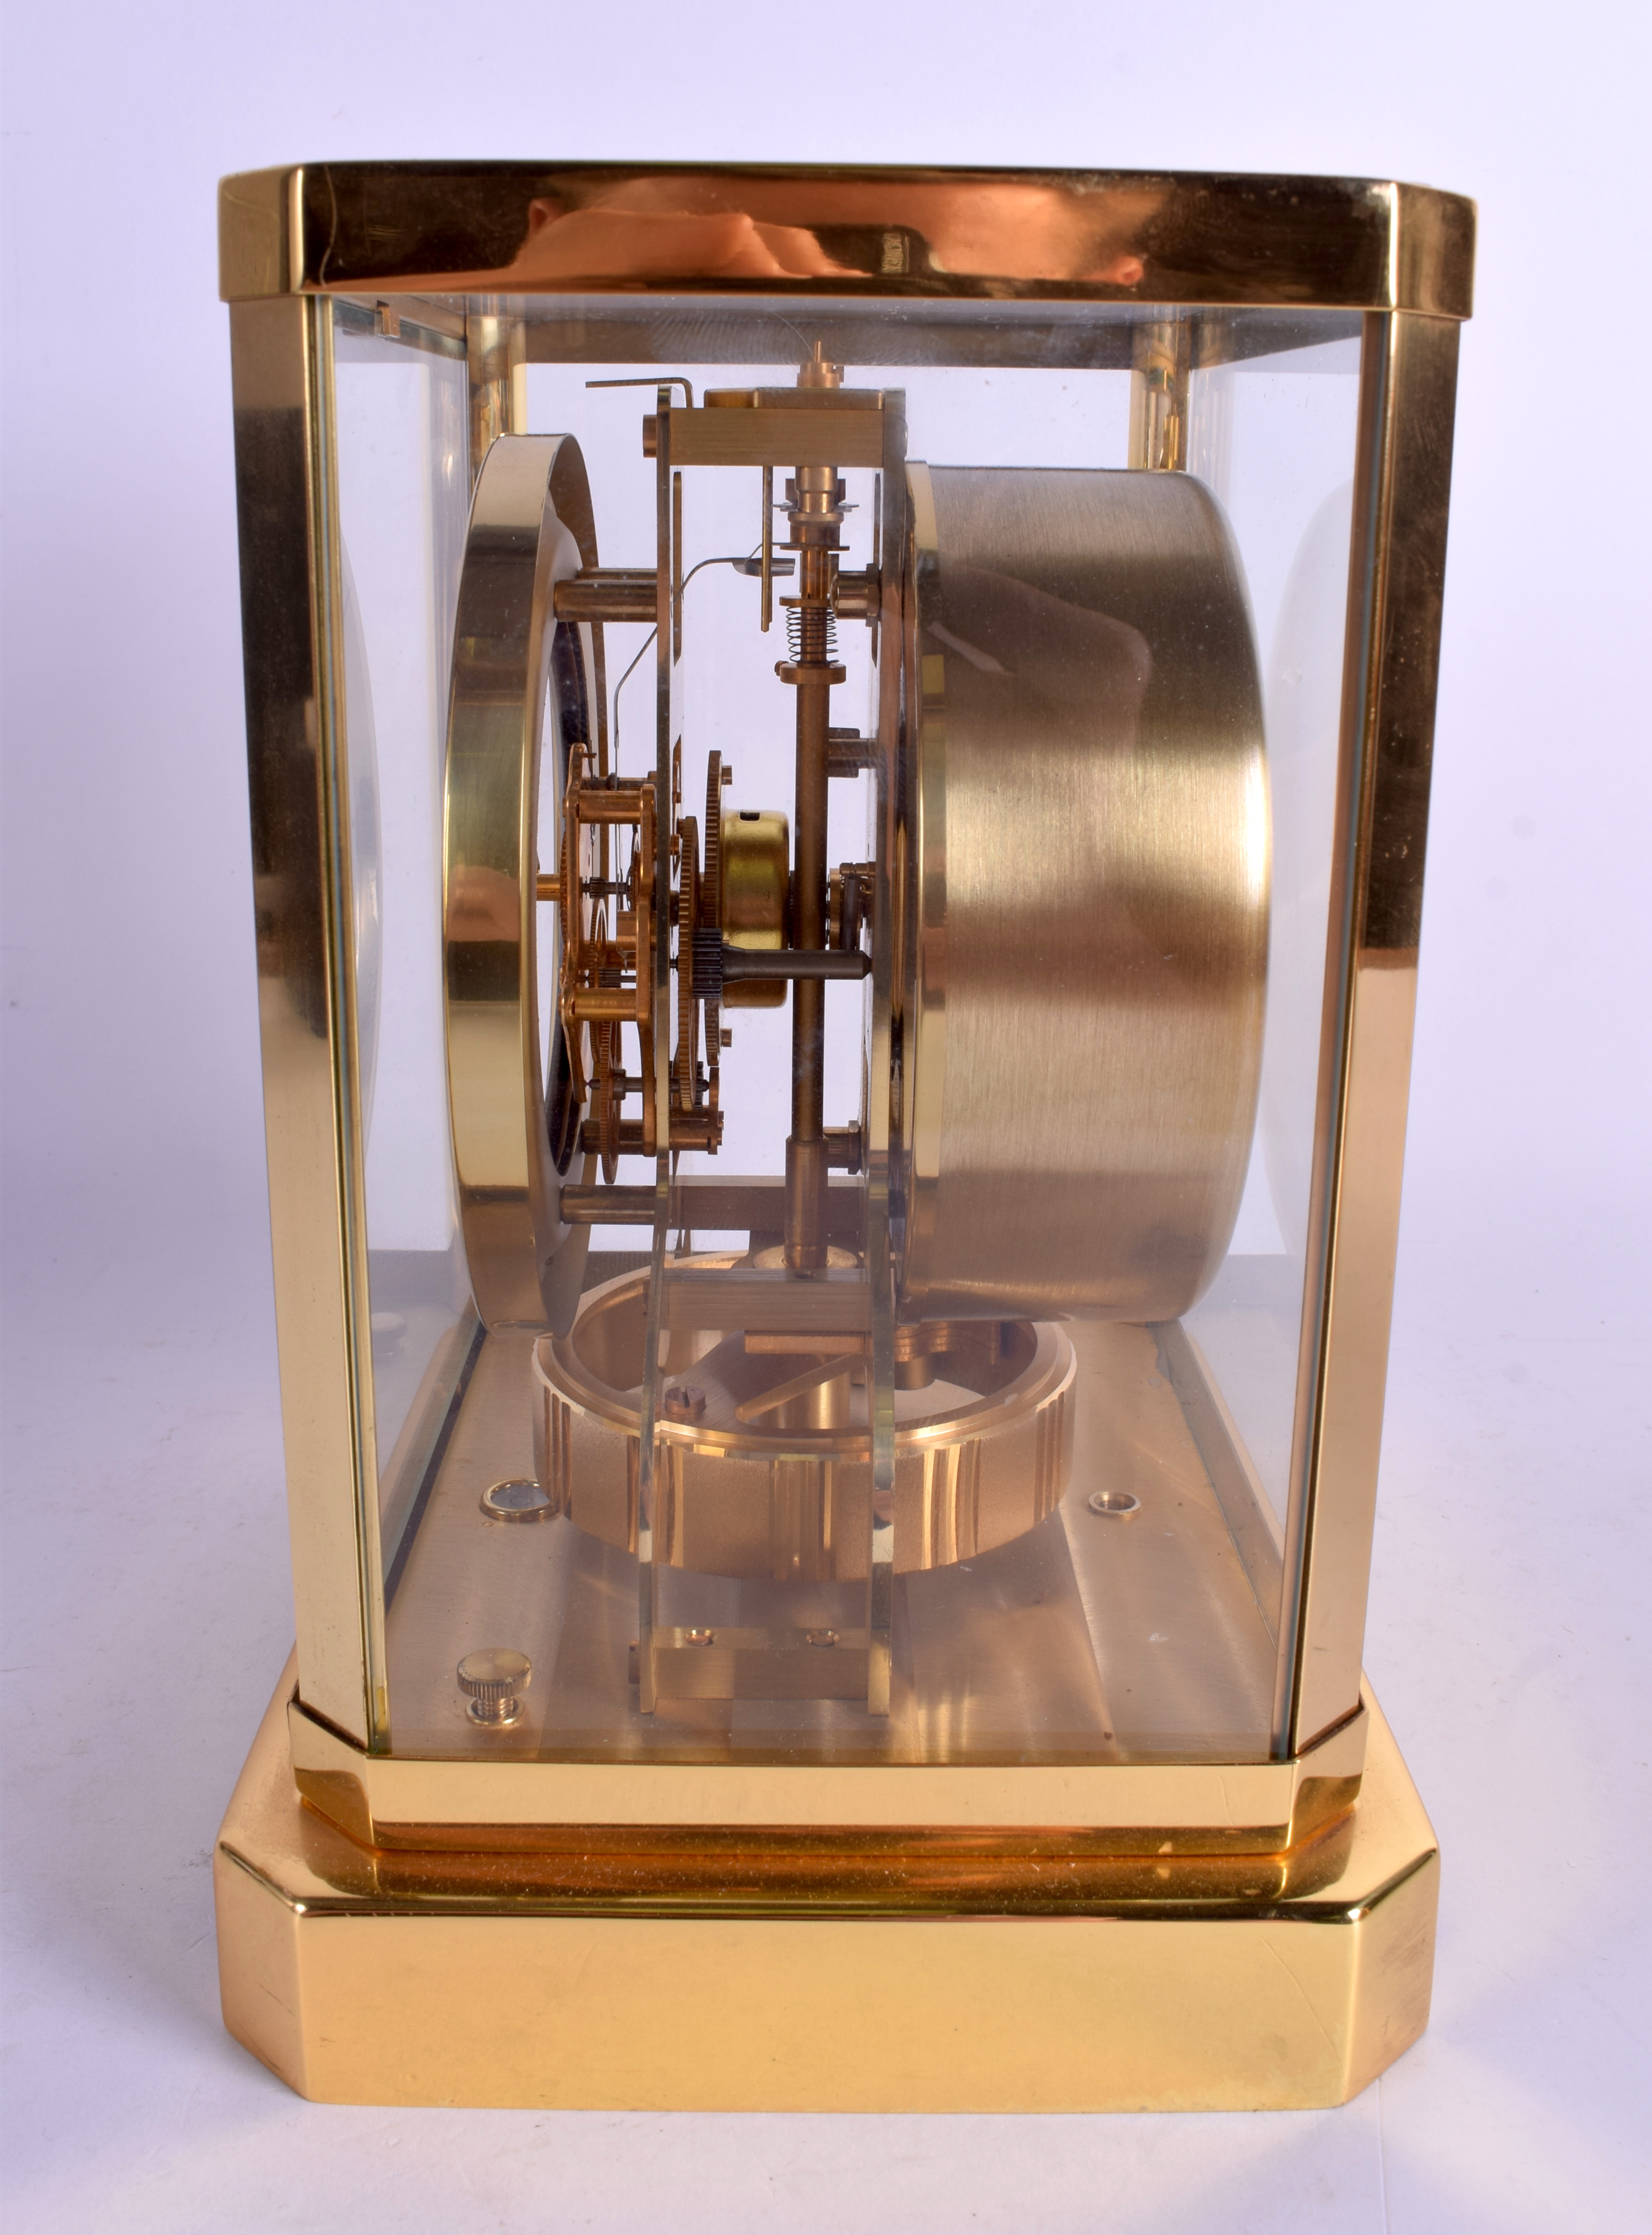 A JAEGER LE COULTER BRASS ATMOS CLOCK No. 292772. 23.5 cm x 18.5 cm. - Image 2 of 4